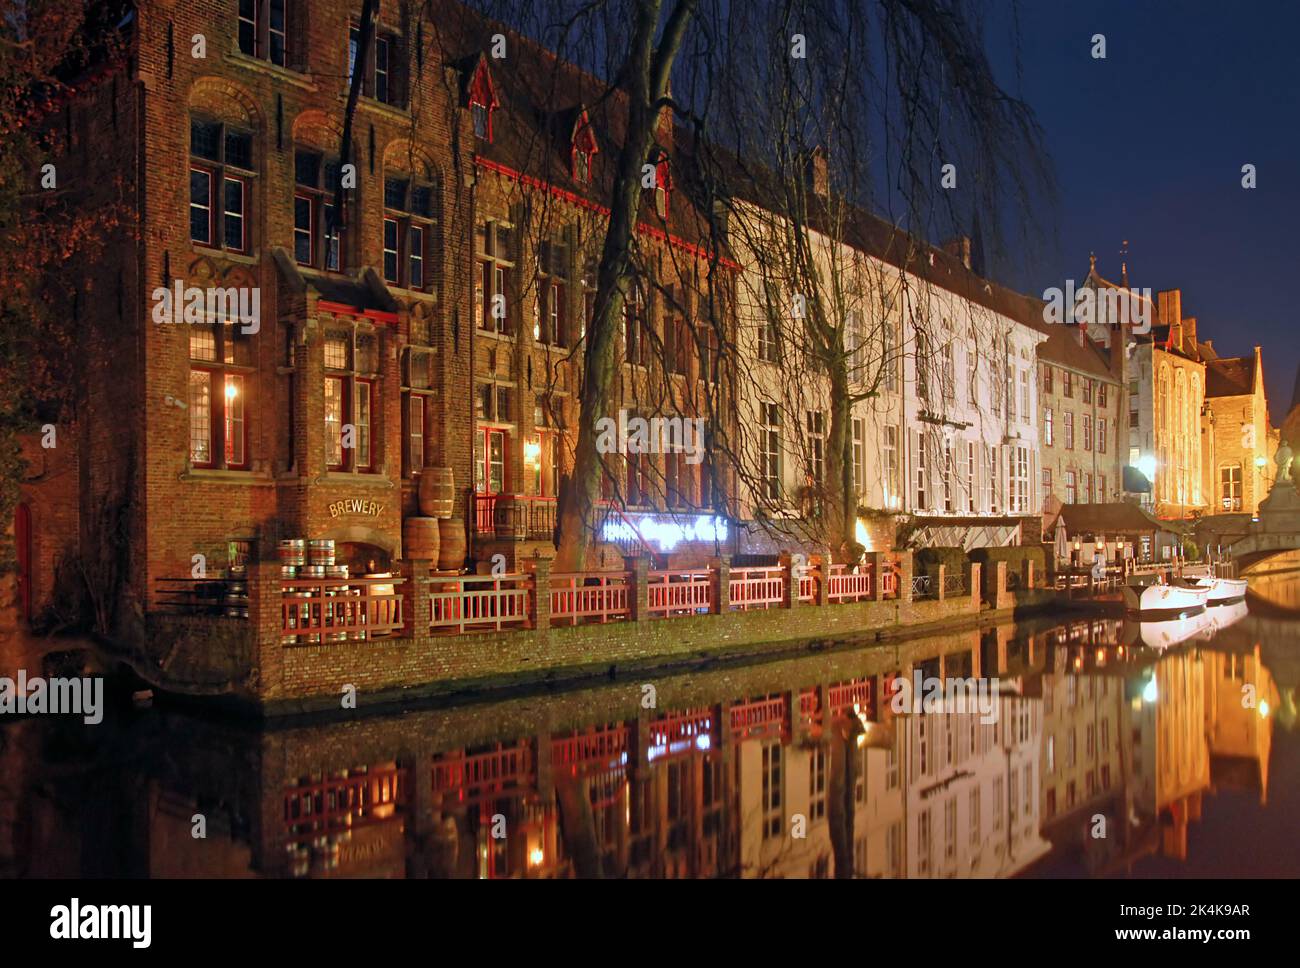 Brugge or Bruges, West Flanders, Belgium: The Dijver Canal in Brugge at night with the Bourgogne des Flandres Brewery and Distillery. Stock Photo